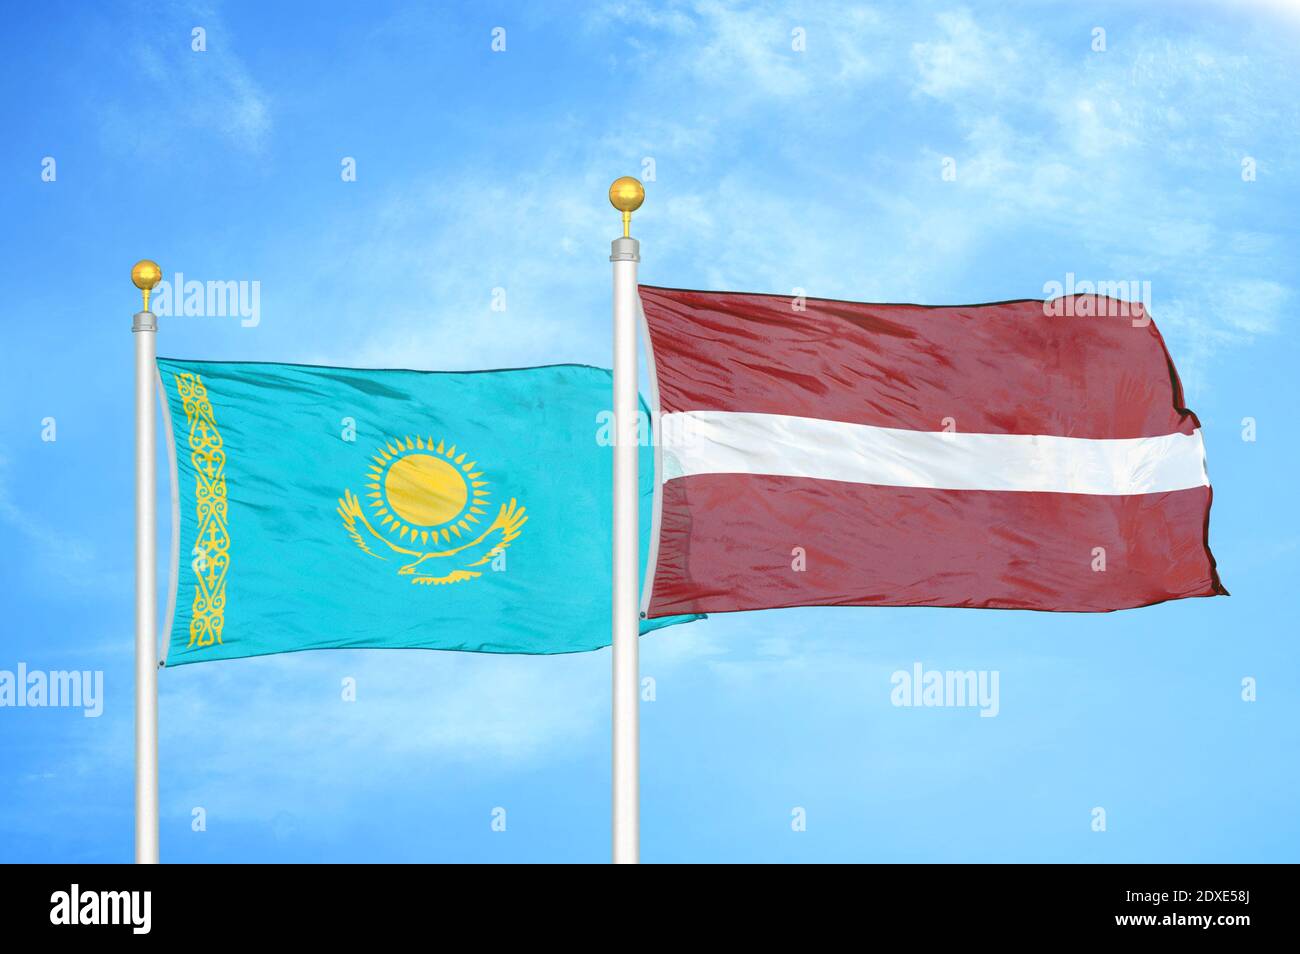 Kazakhstan and Latvia two flags on flagpoles and blue sky Stock Photo